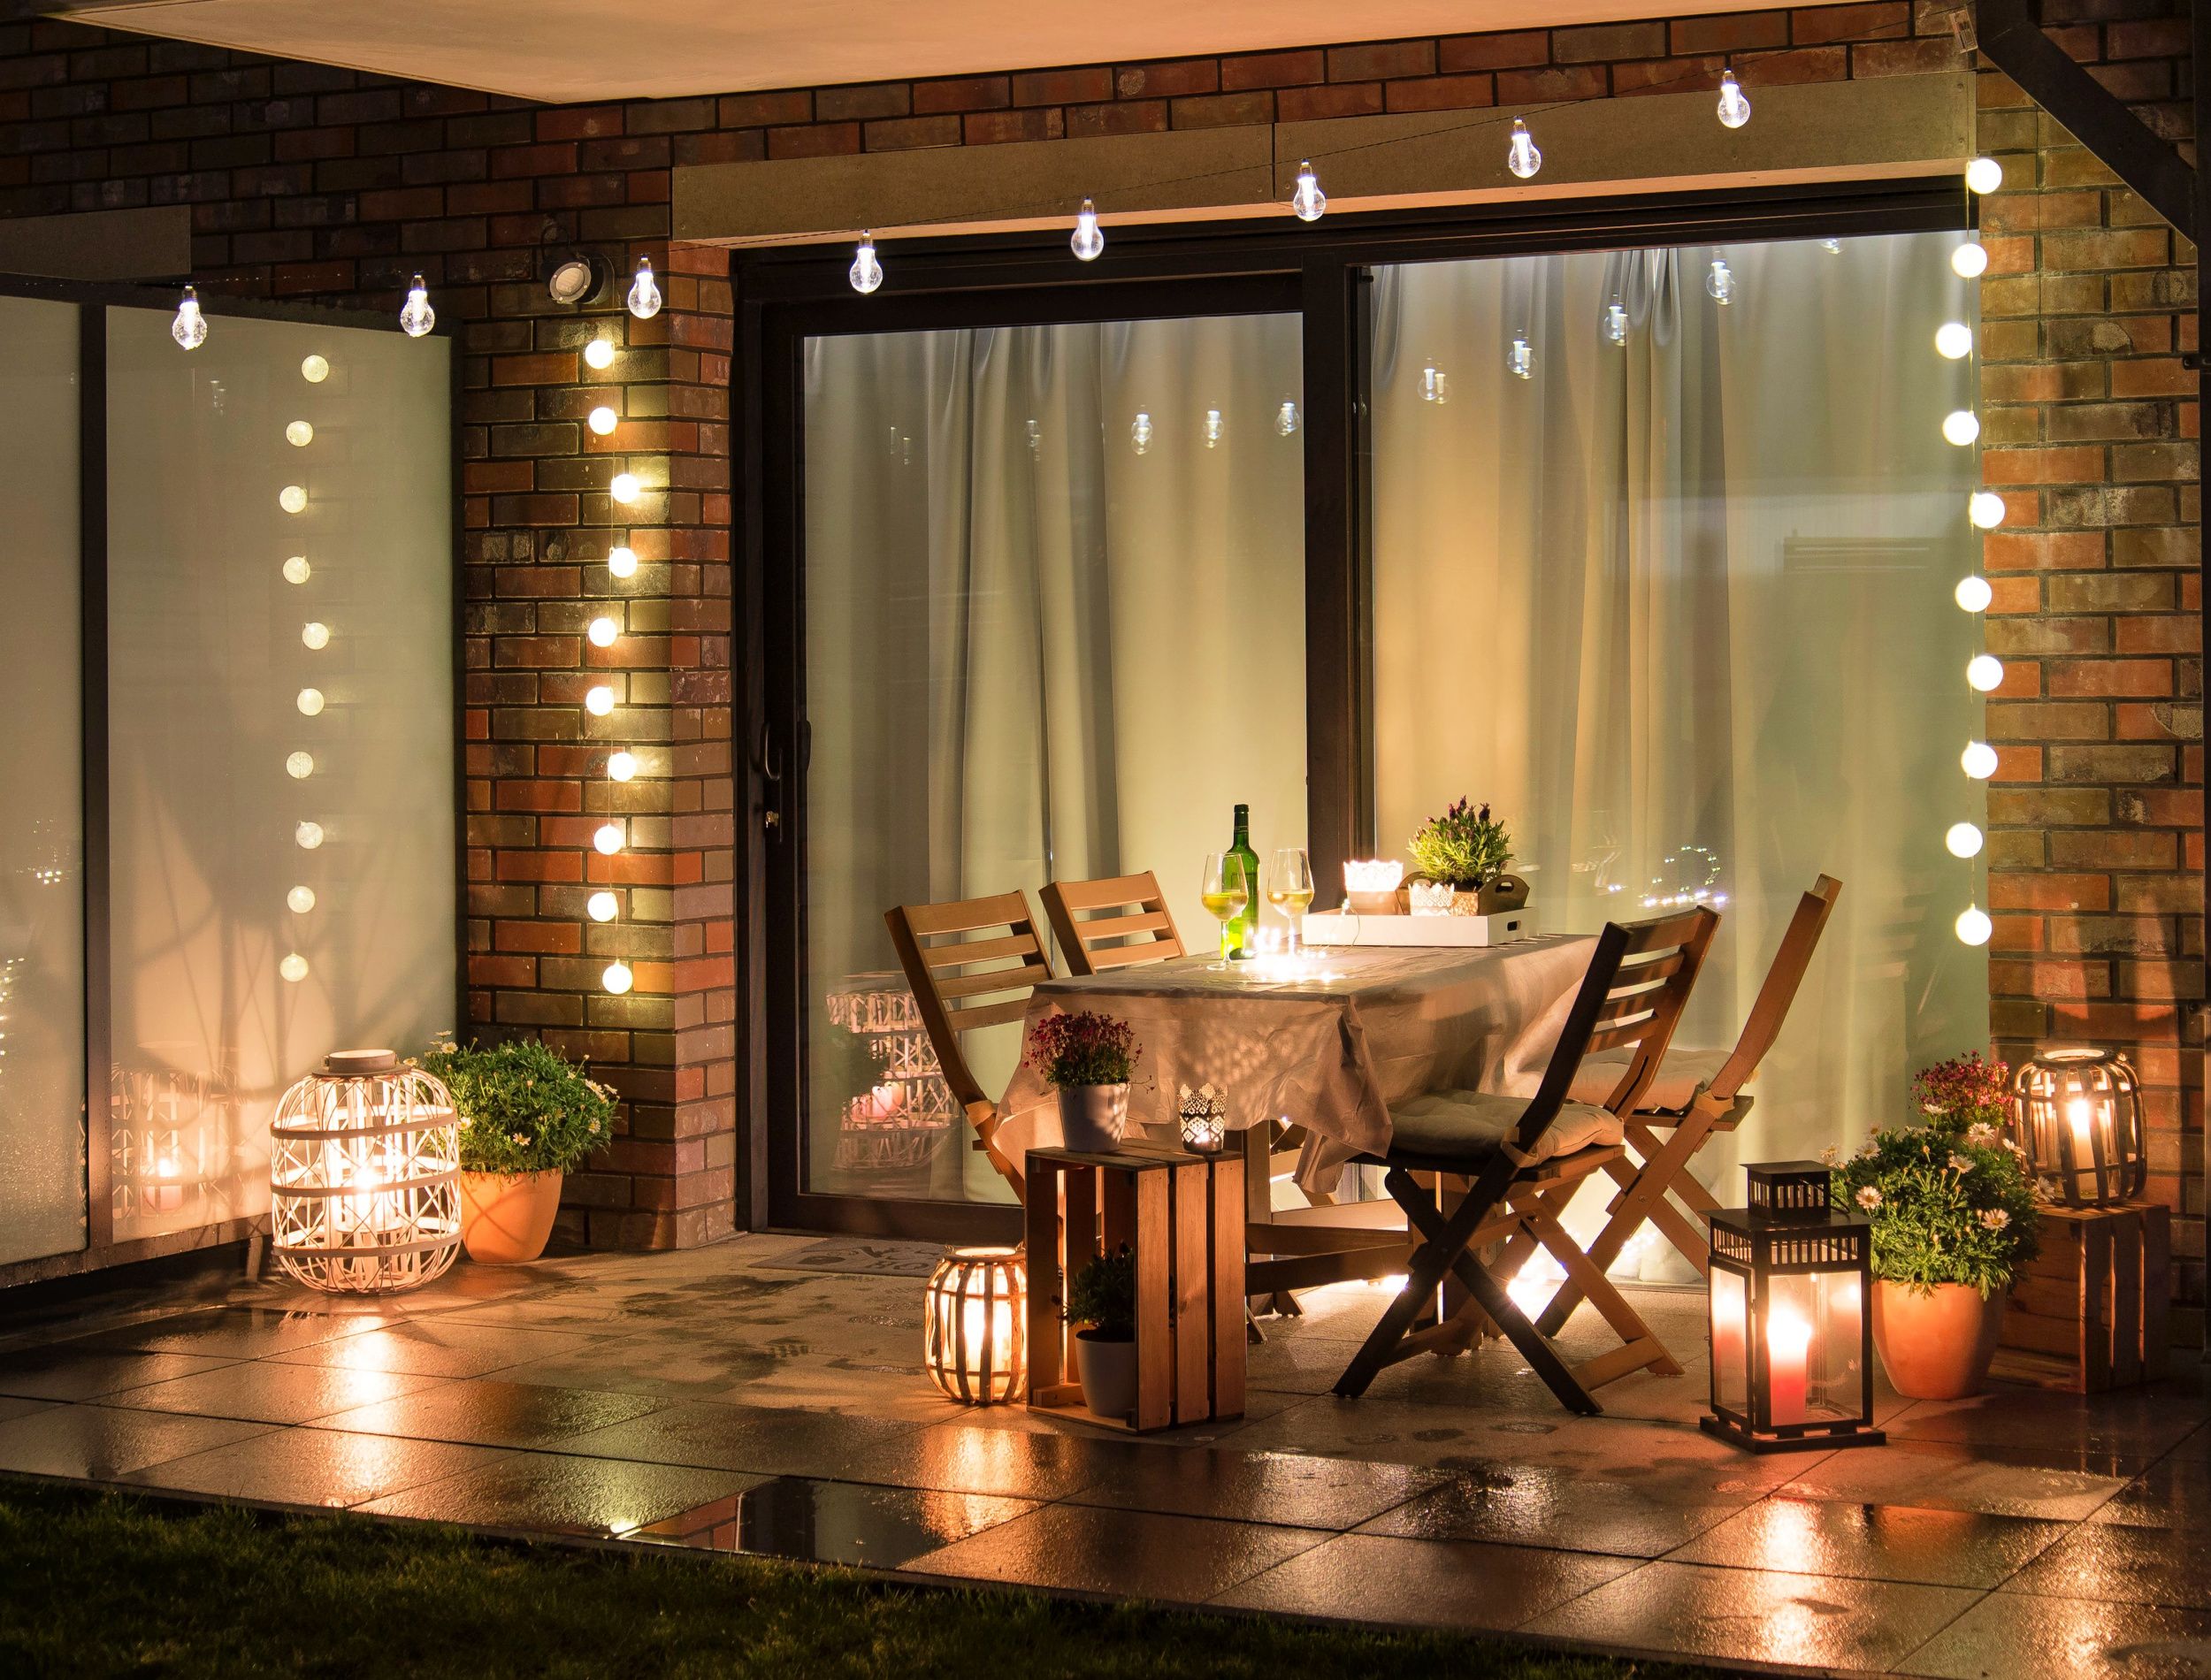 Summer evening terrace with candles, wine and lights